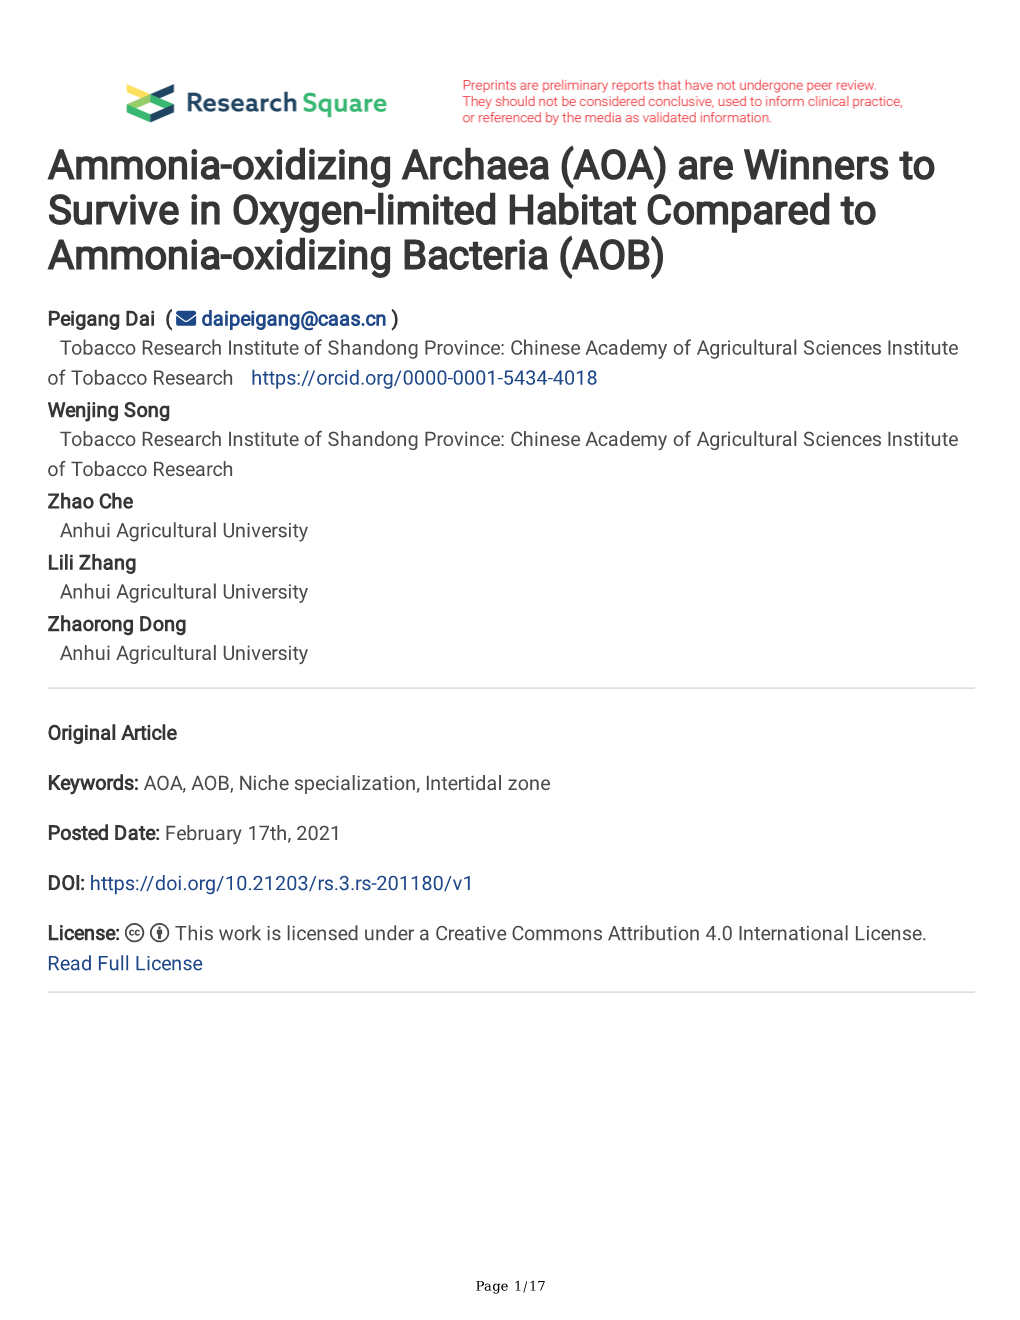 Ammonia-Oxidizing Archaea (AOA) Are Winners to Survive in Oxygen-Limited Habitat Compared to Ammonia-Oxidizing Bacteria (AOB)